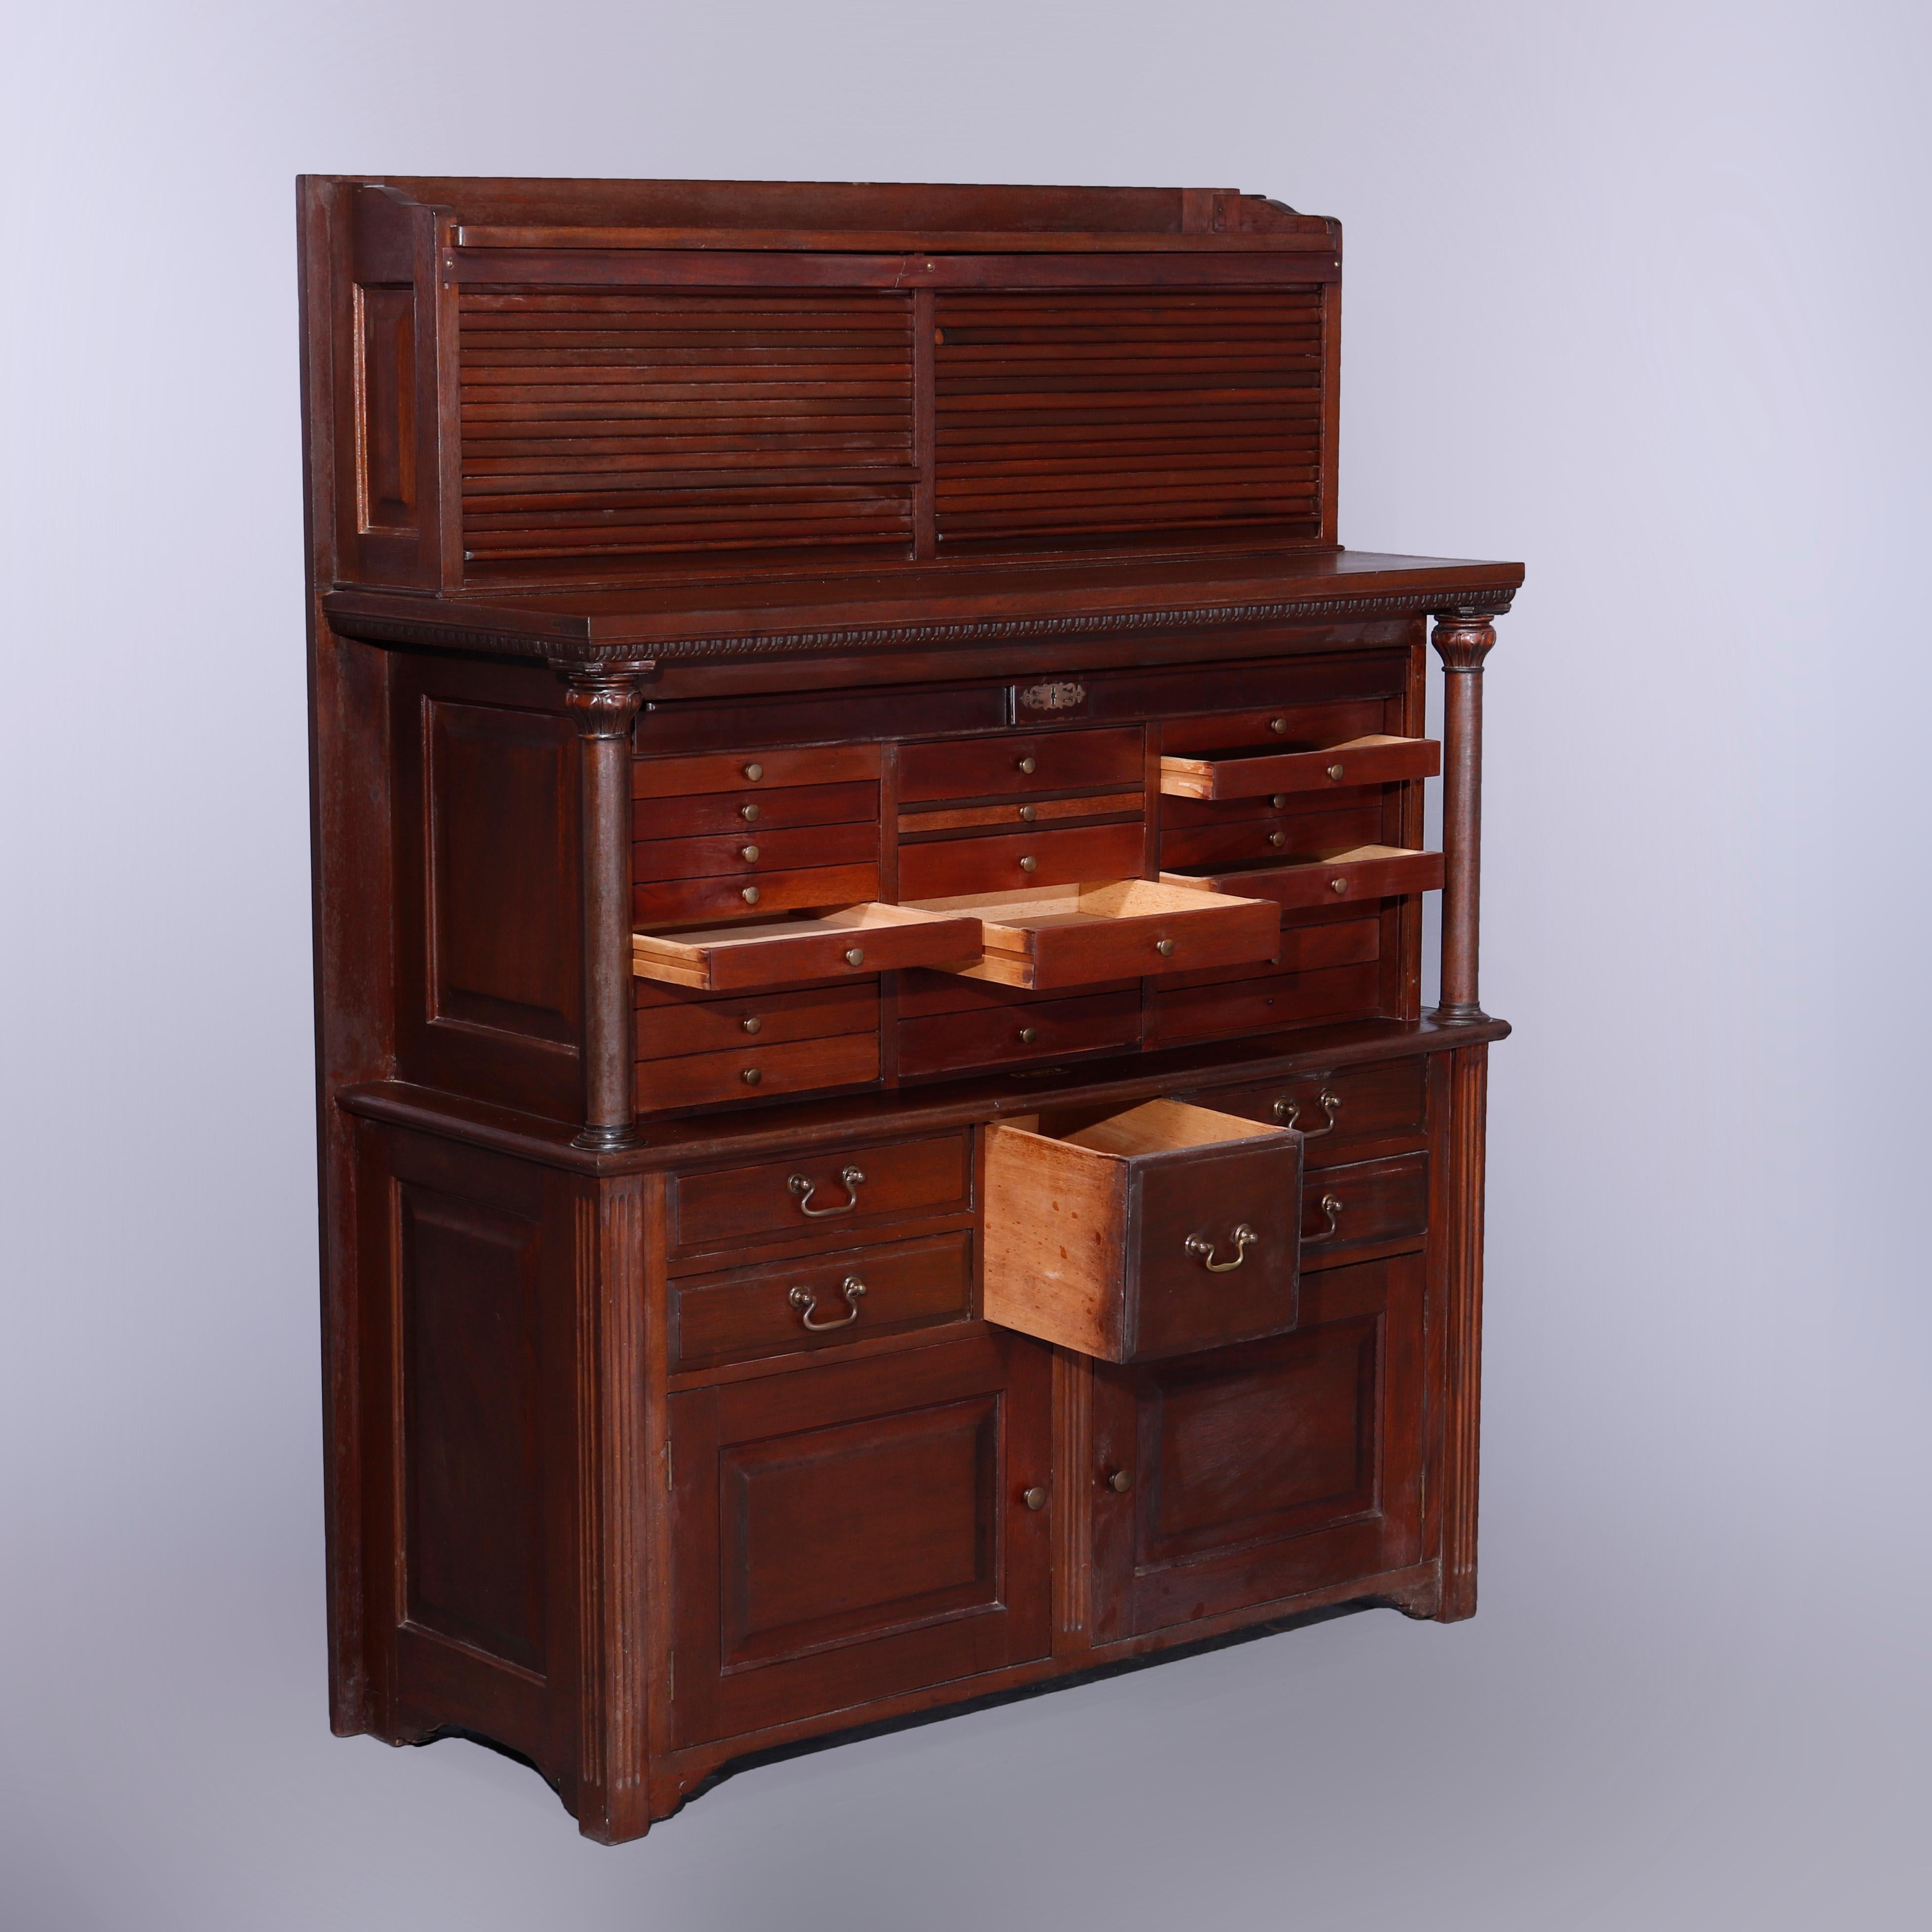 An antique American Empire dental cabinet offers raised panel mahogany construction with upper having tambour doors raising to reveal compartmentalized storage over center section with twenty-two small drawers and flanking Grecian Doric Column